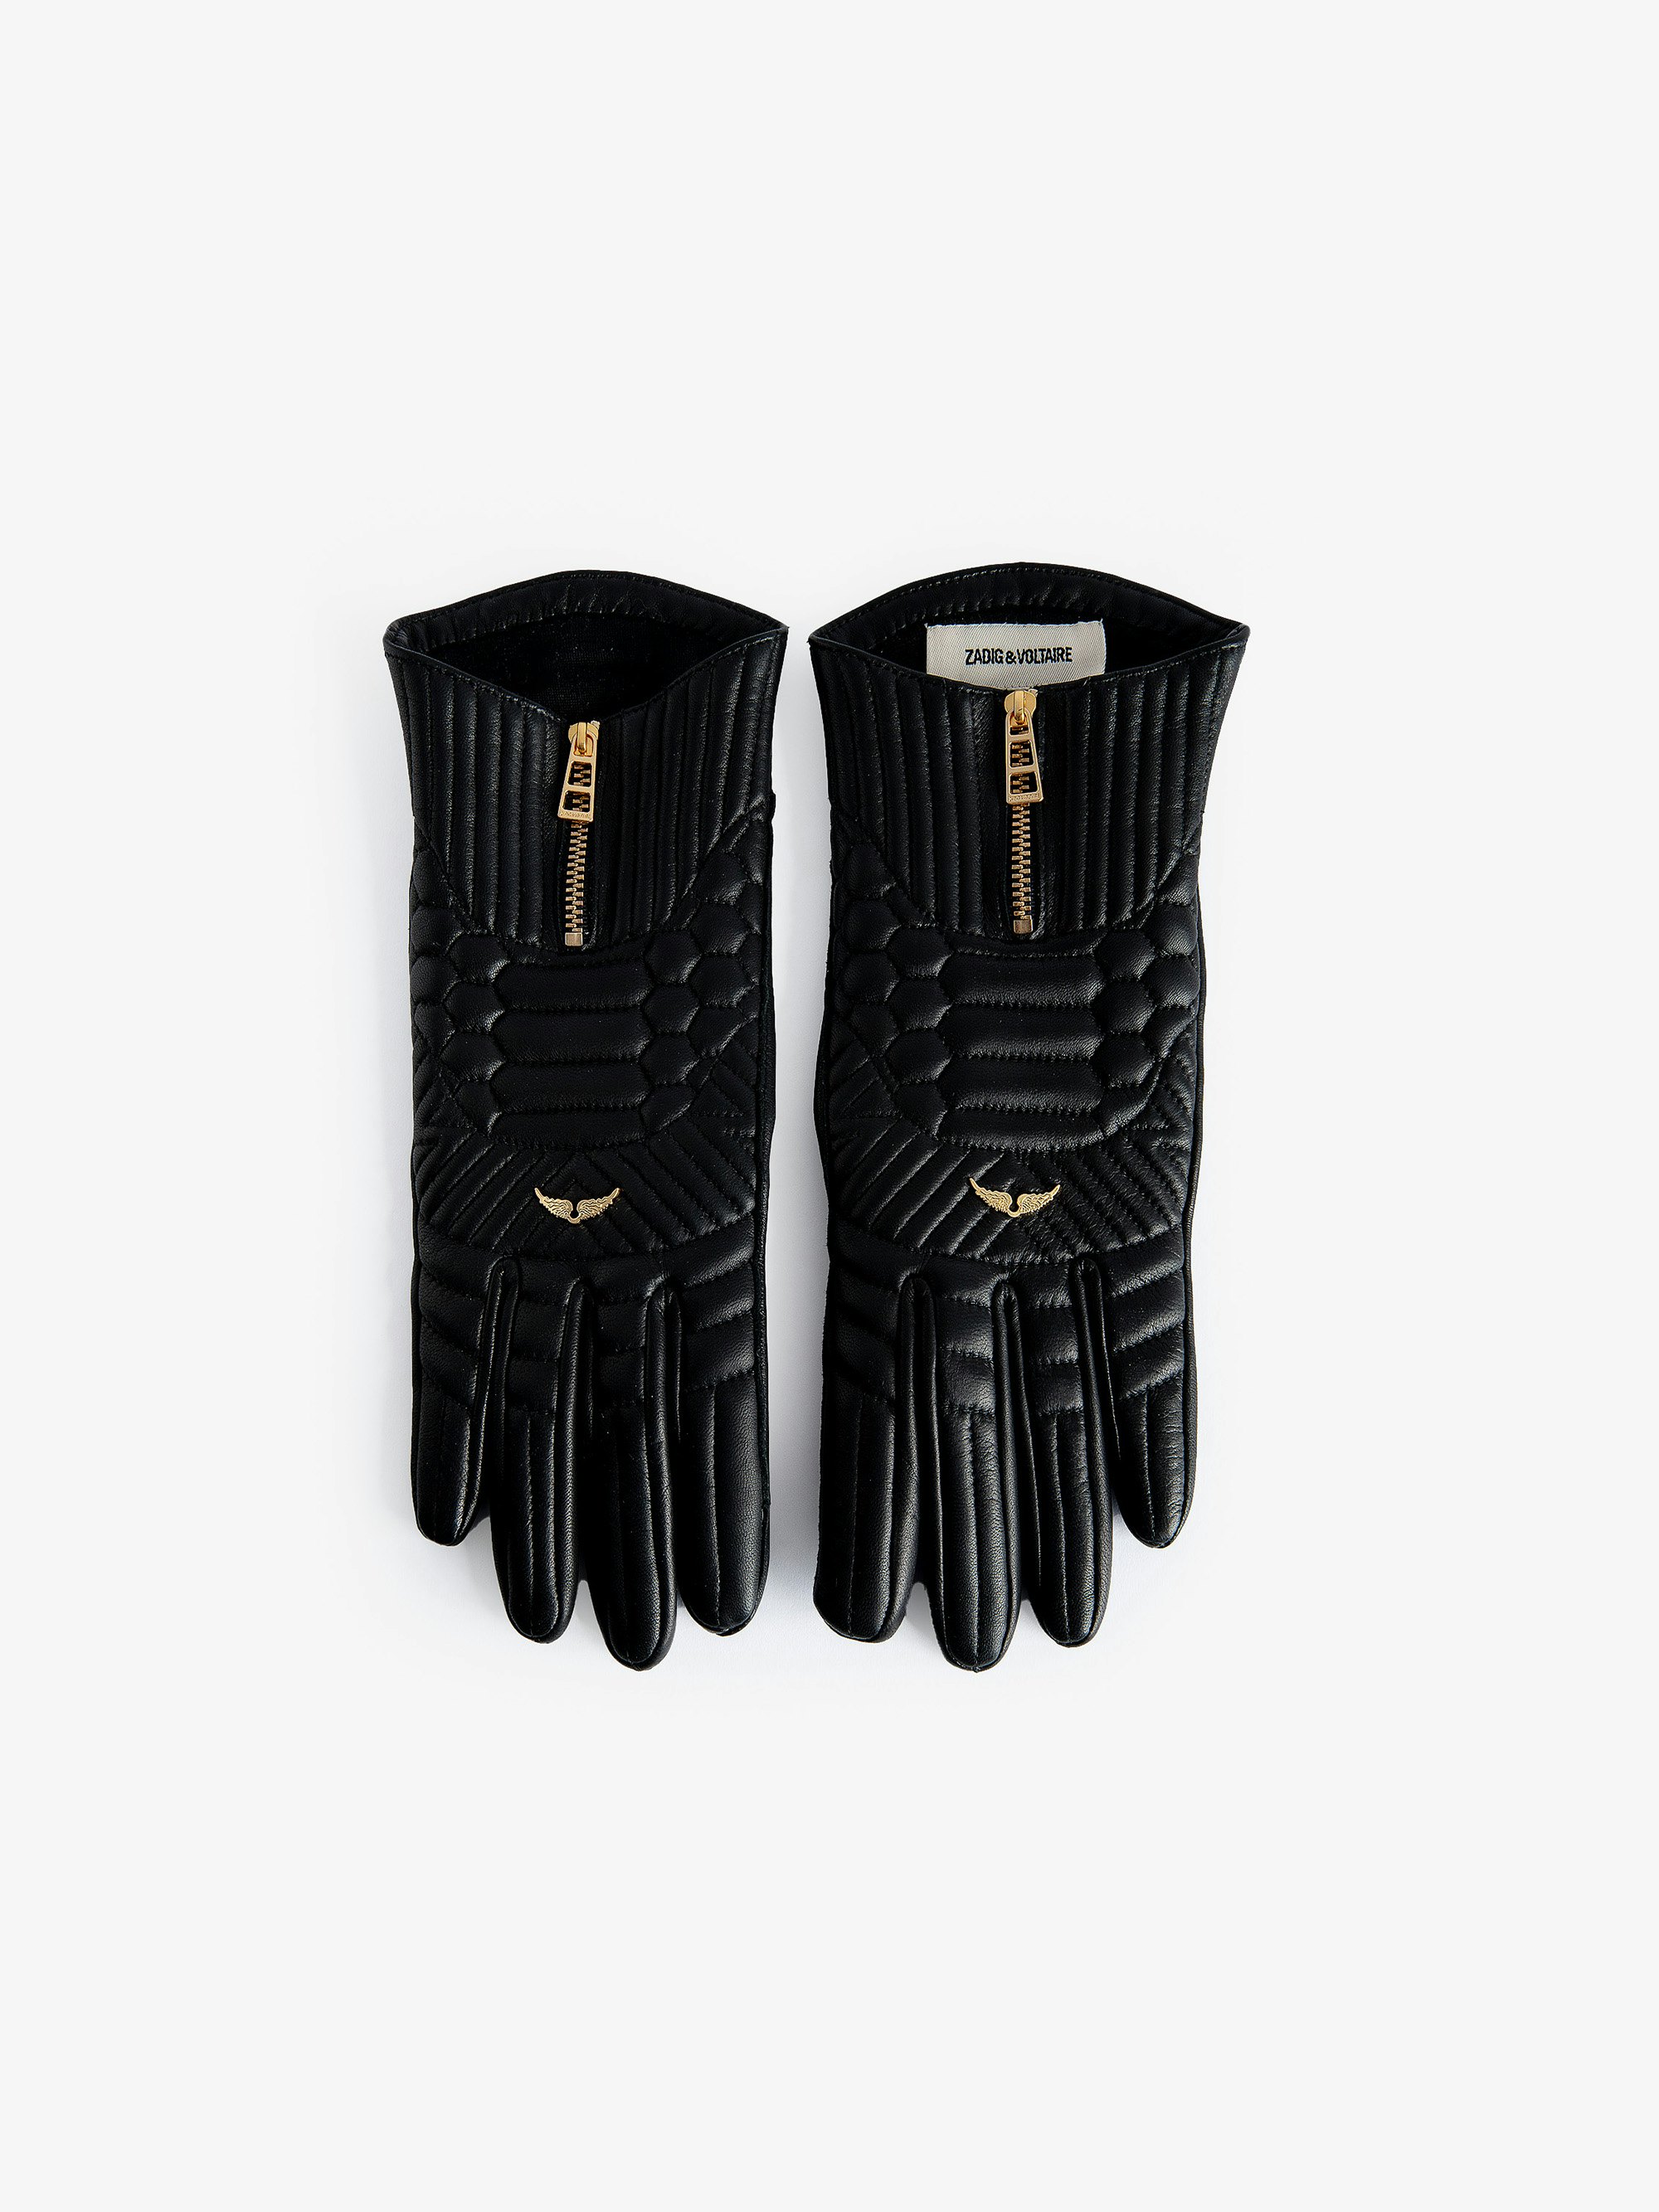 Out of Hands Gloves - Voltaire Vice gloves in smooth, quilted black leather, made in the workshops of the famous Agnelle glovemaker.